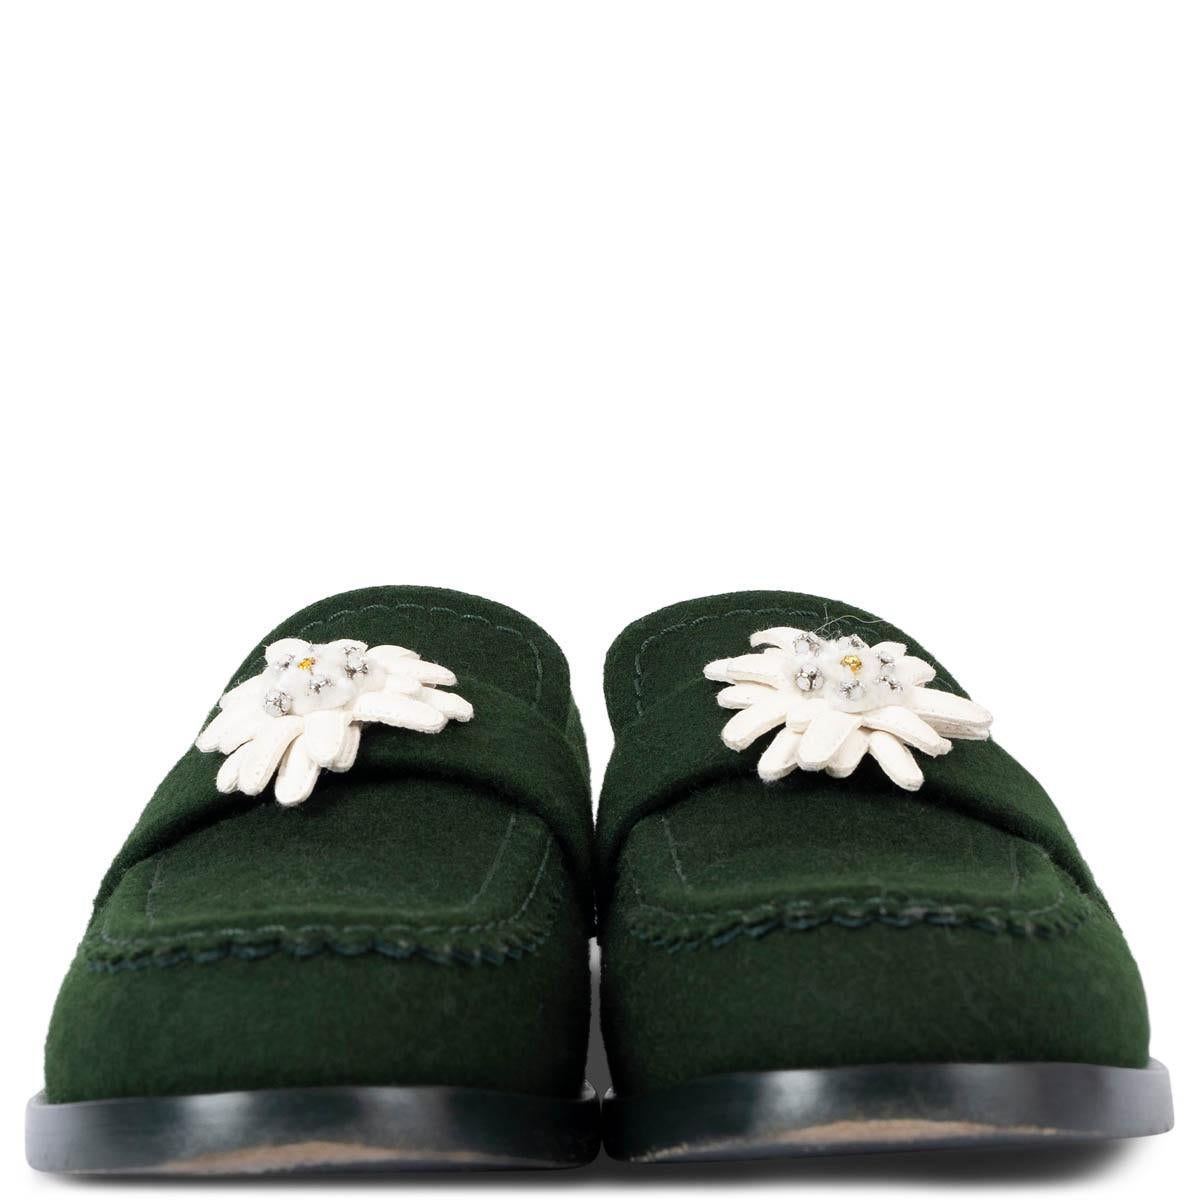 100% authentic Chanel Edelweiss penny loafers in forest green wool felt embellished with white lambskin Edelweiss flower. Have been worn and are in excellent condition. 

2015 Paris-Salzburg Metiers d'Art

Measurements
Model	15A G31006
Imprinted